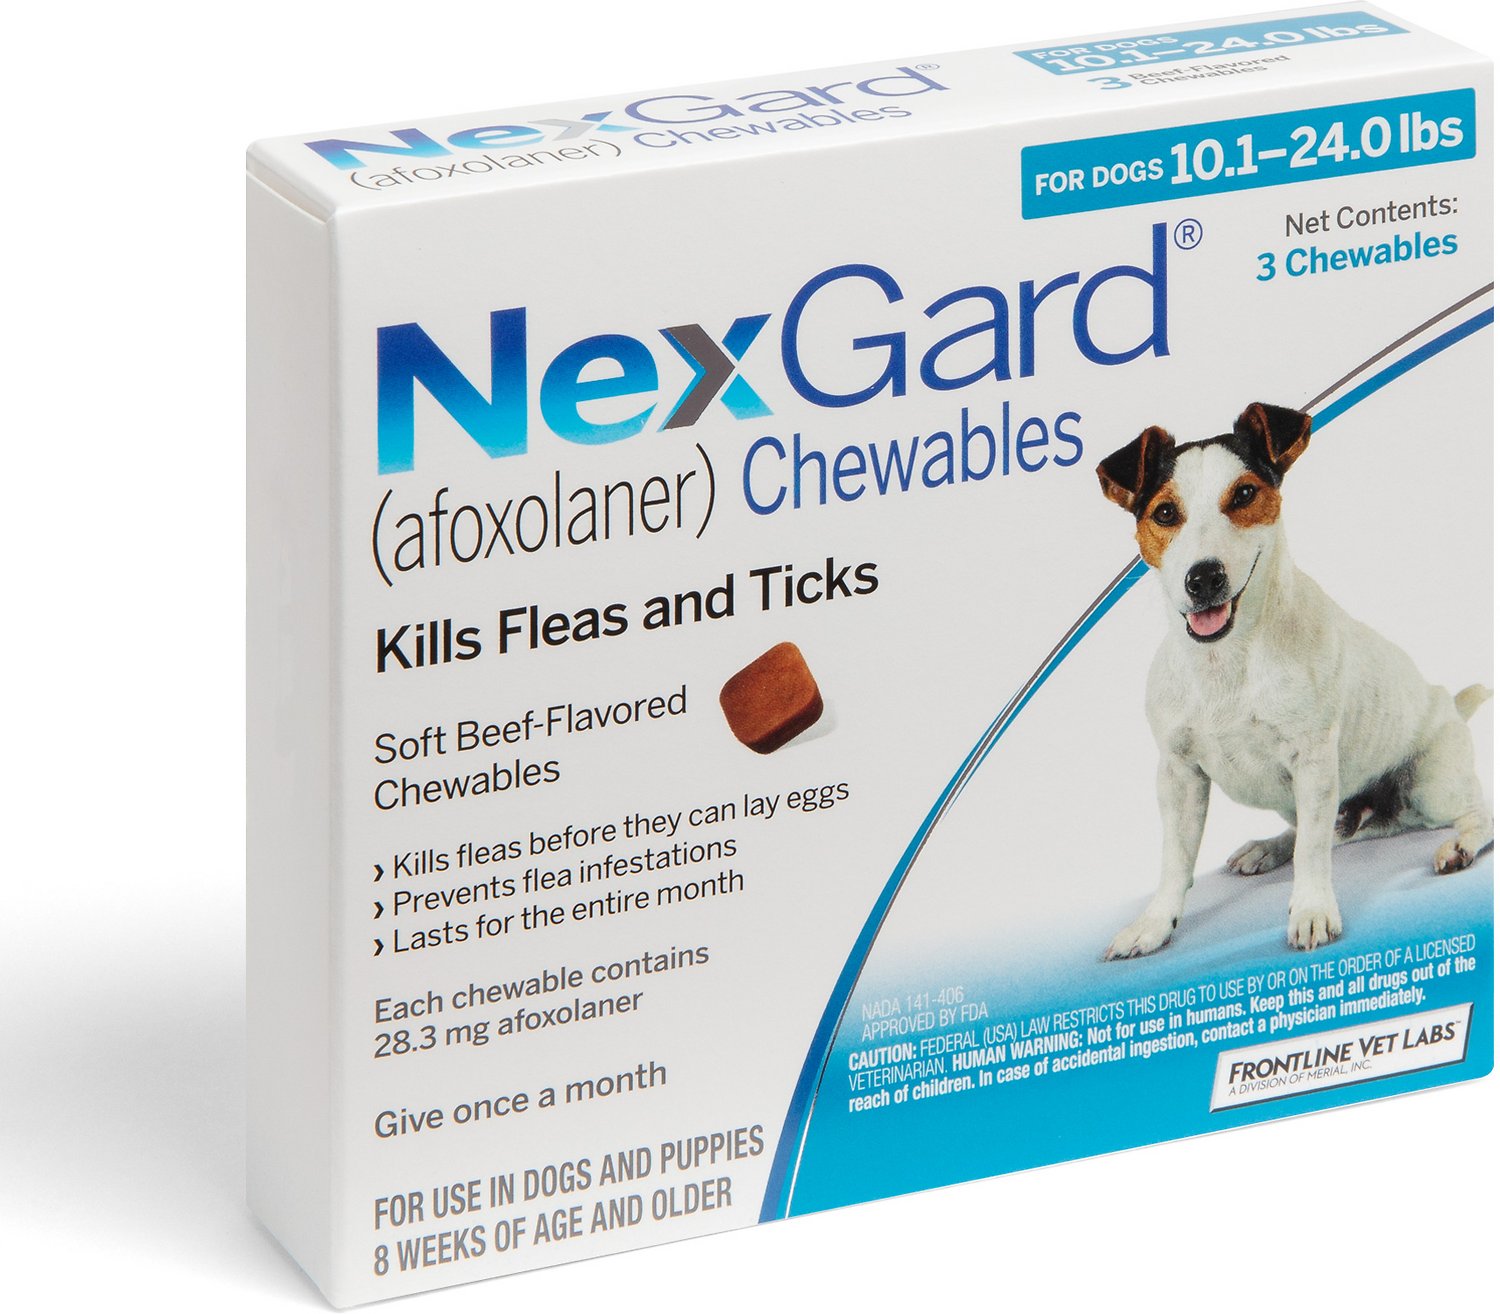 NexGard Chewable Tablets For Dogs 10 1 24 Lbs PASADENA PET STORE 